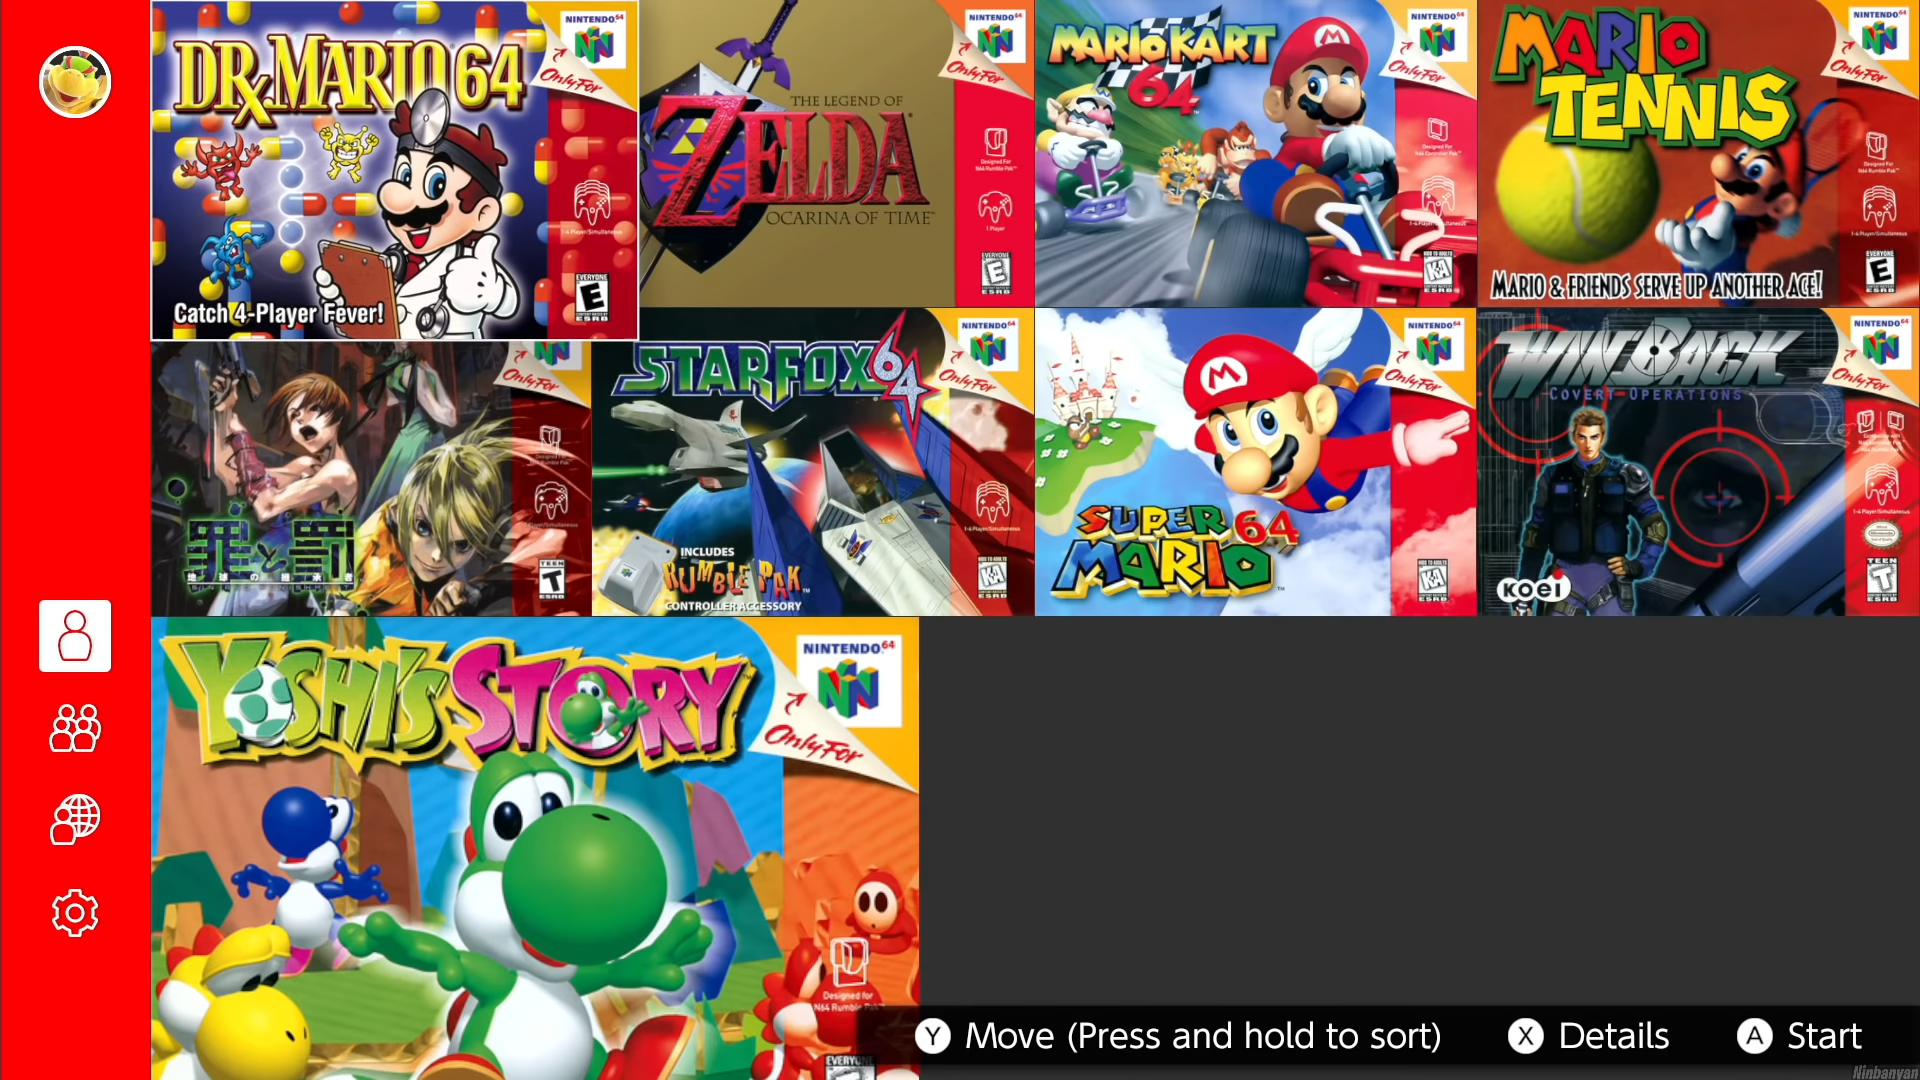 All Nintendo 64 games - Nintendo Switch Online + Expansion Pack